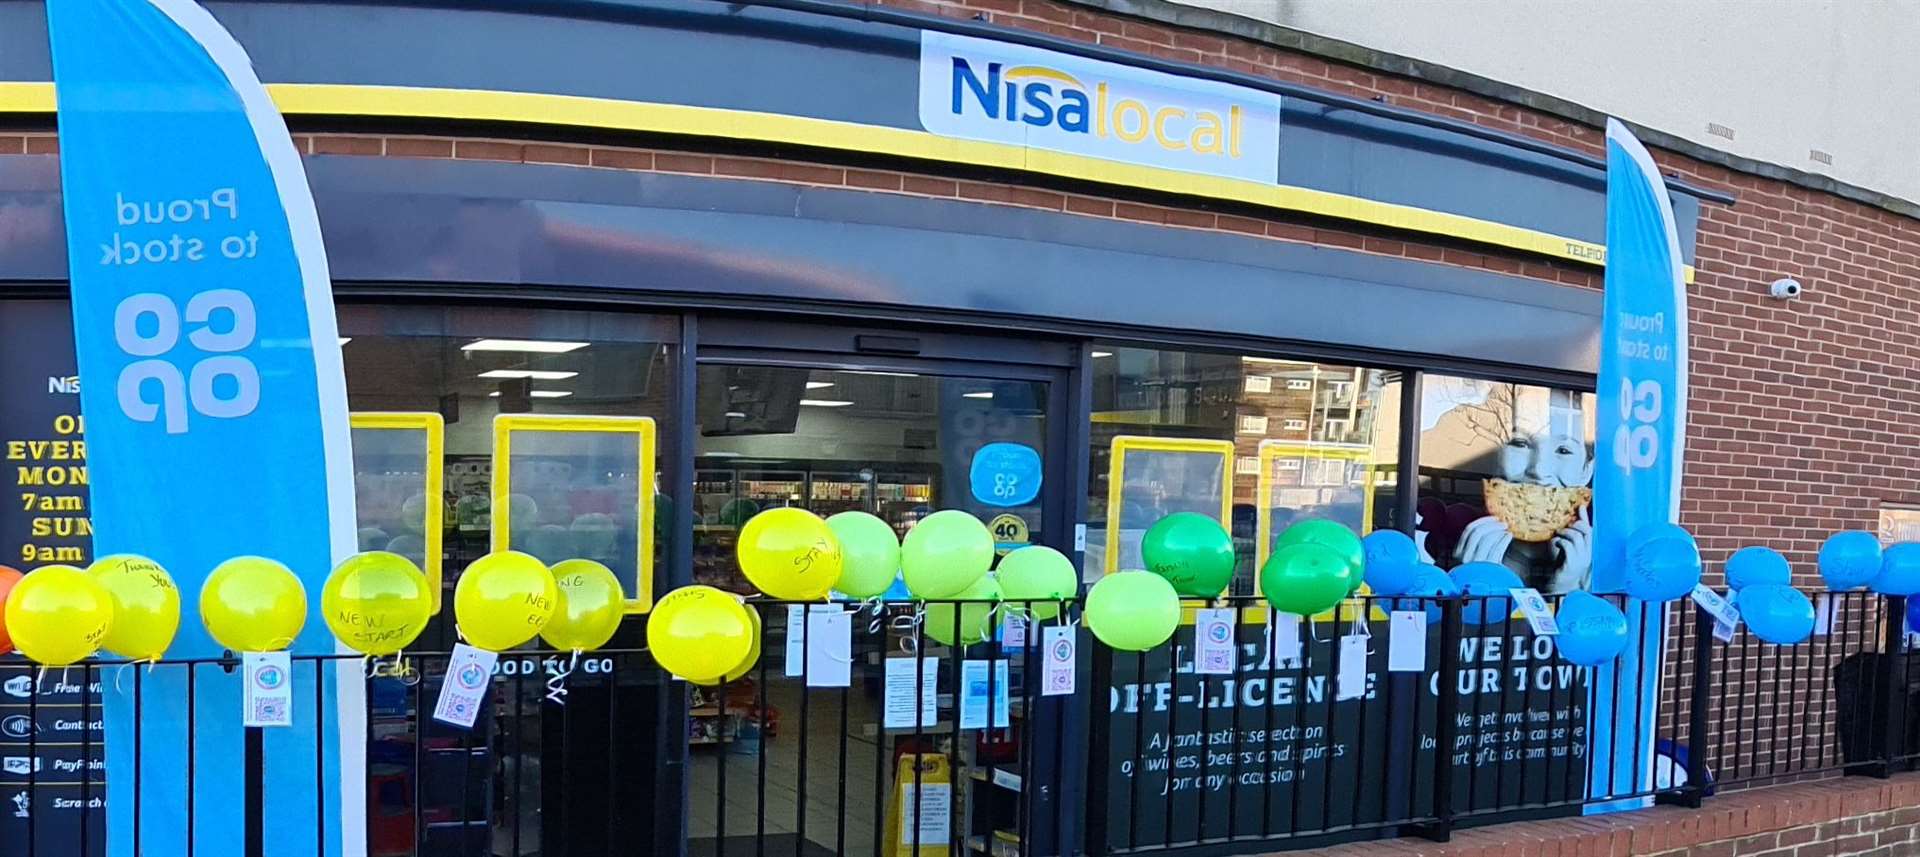 The balloon rainbow Laura helped create outside her local Nisa